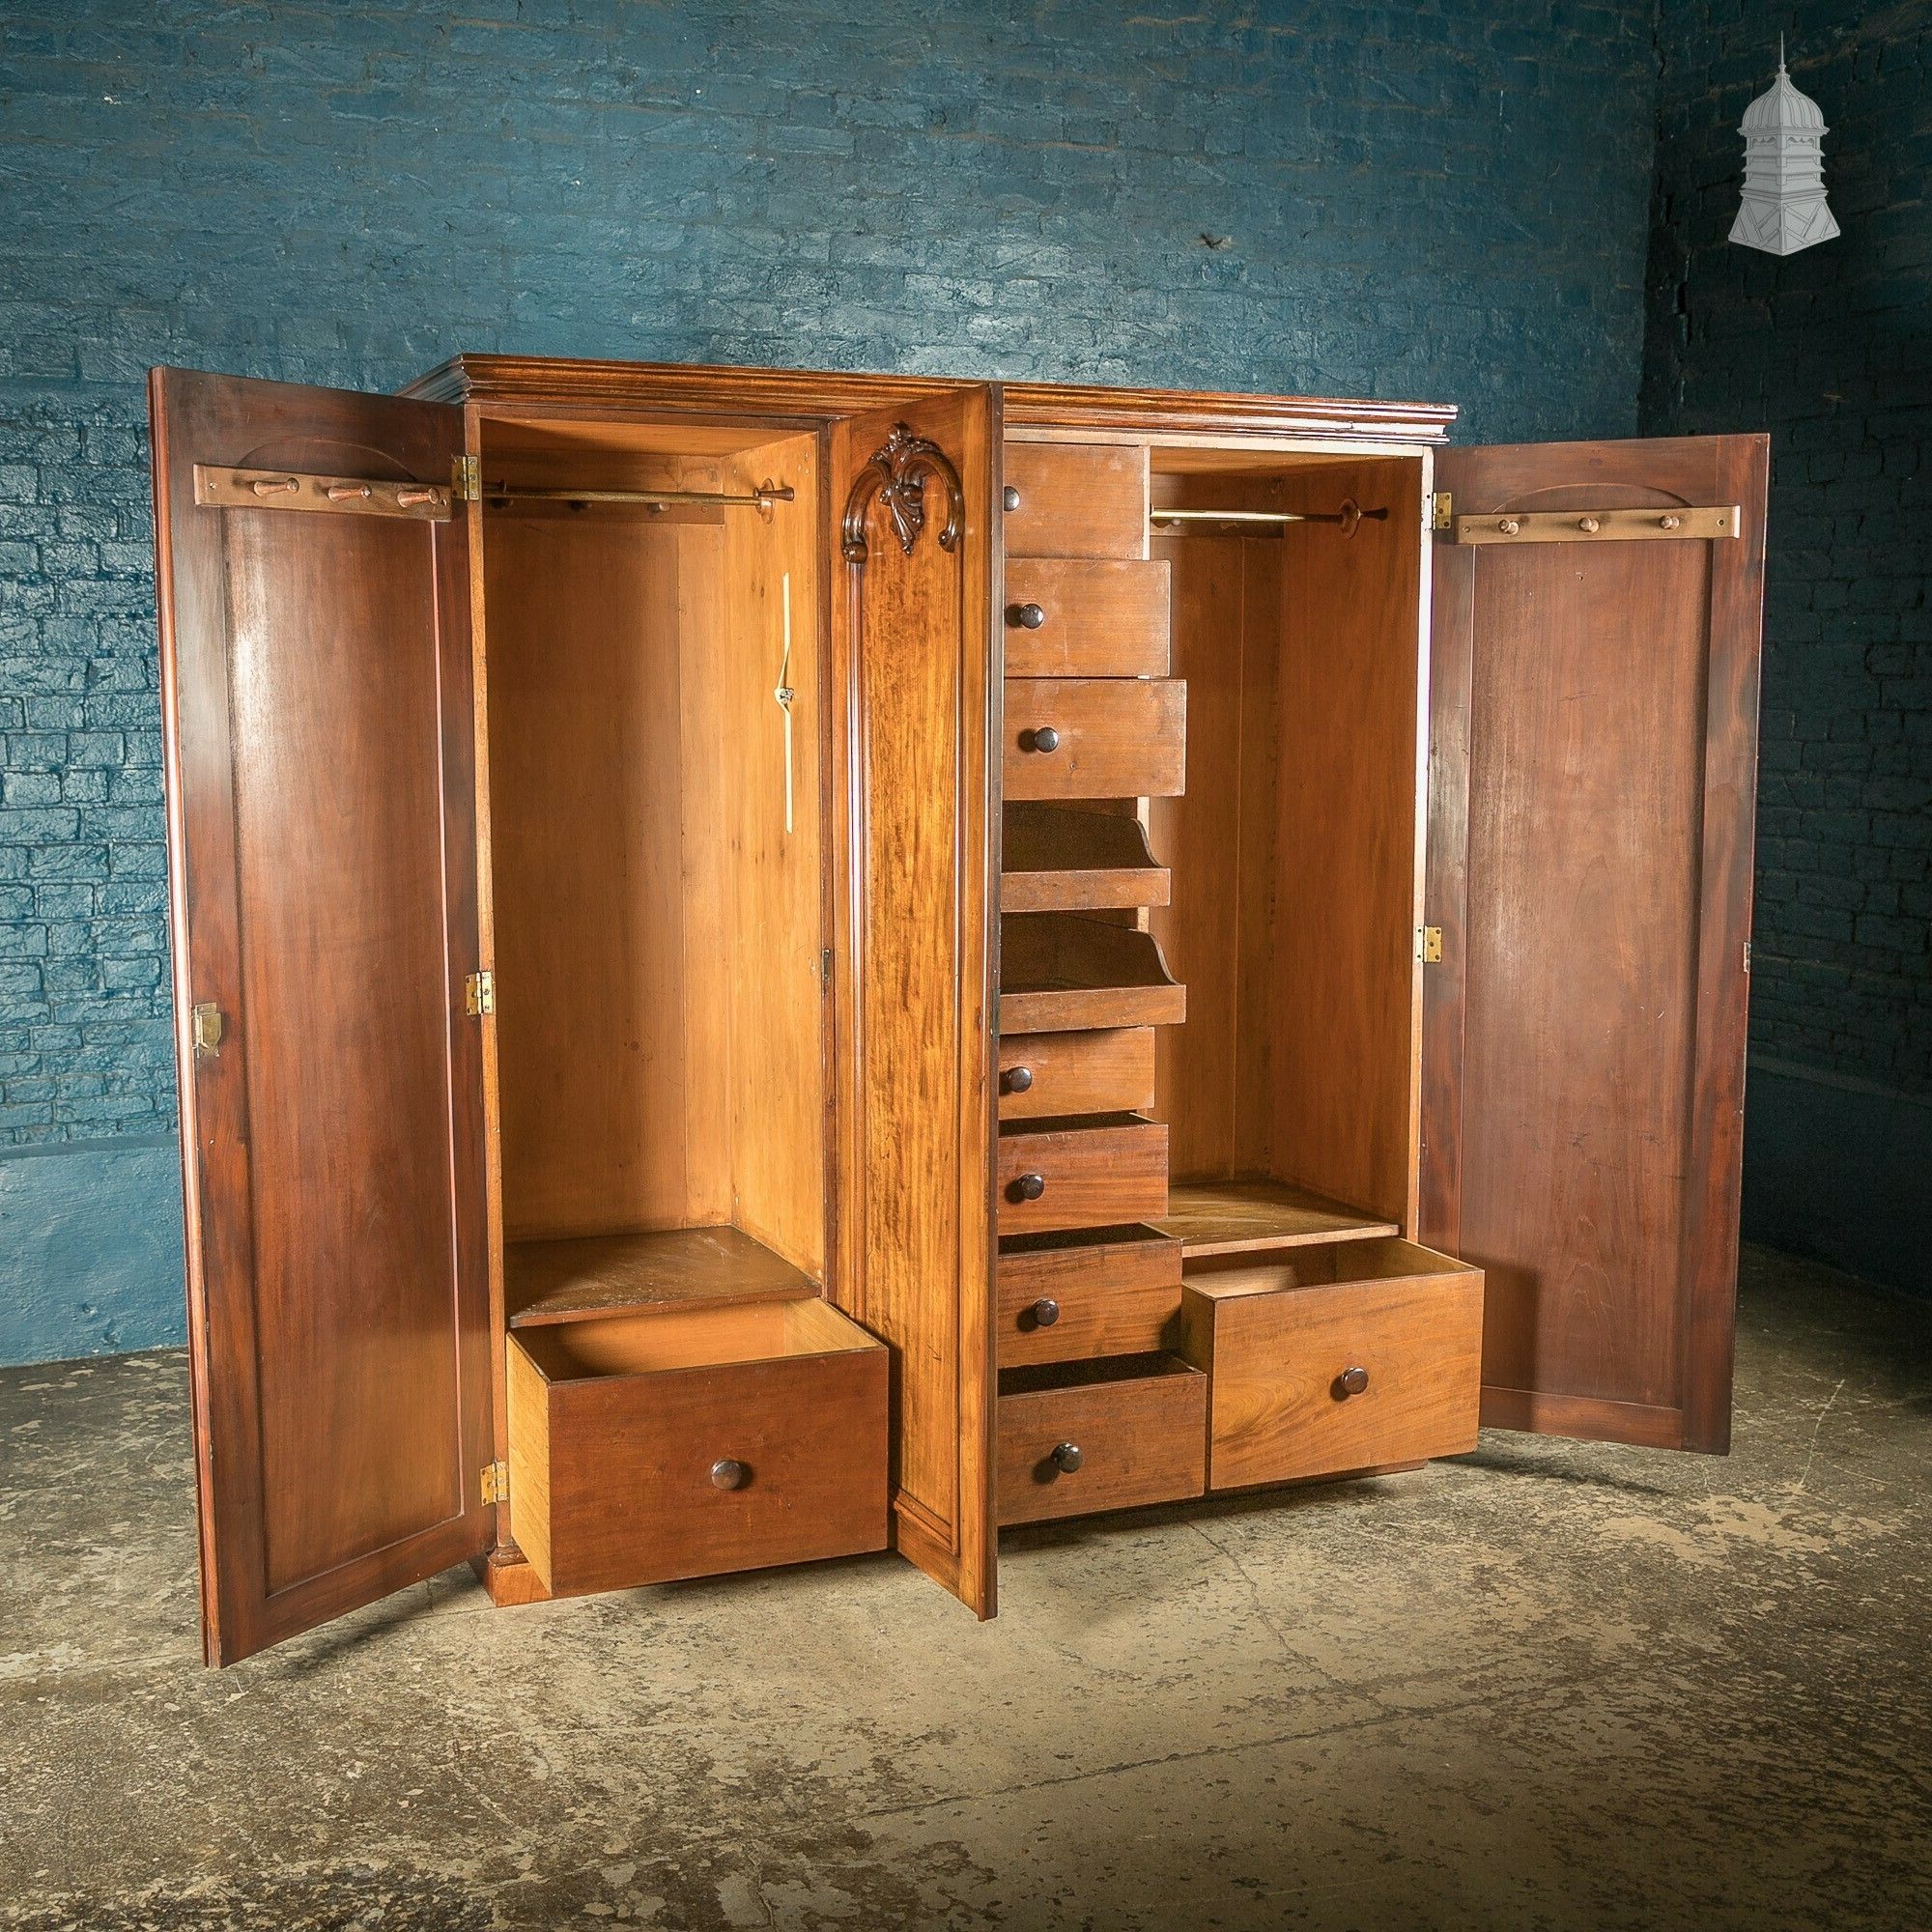 Mahogany Wardrobes From Vintage Experts | Vinterior With Old Fashioned Wardrobes (Gallery 6 of 20)